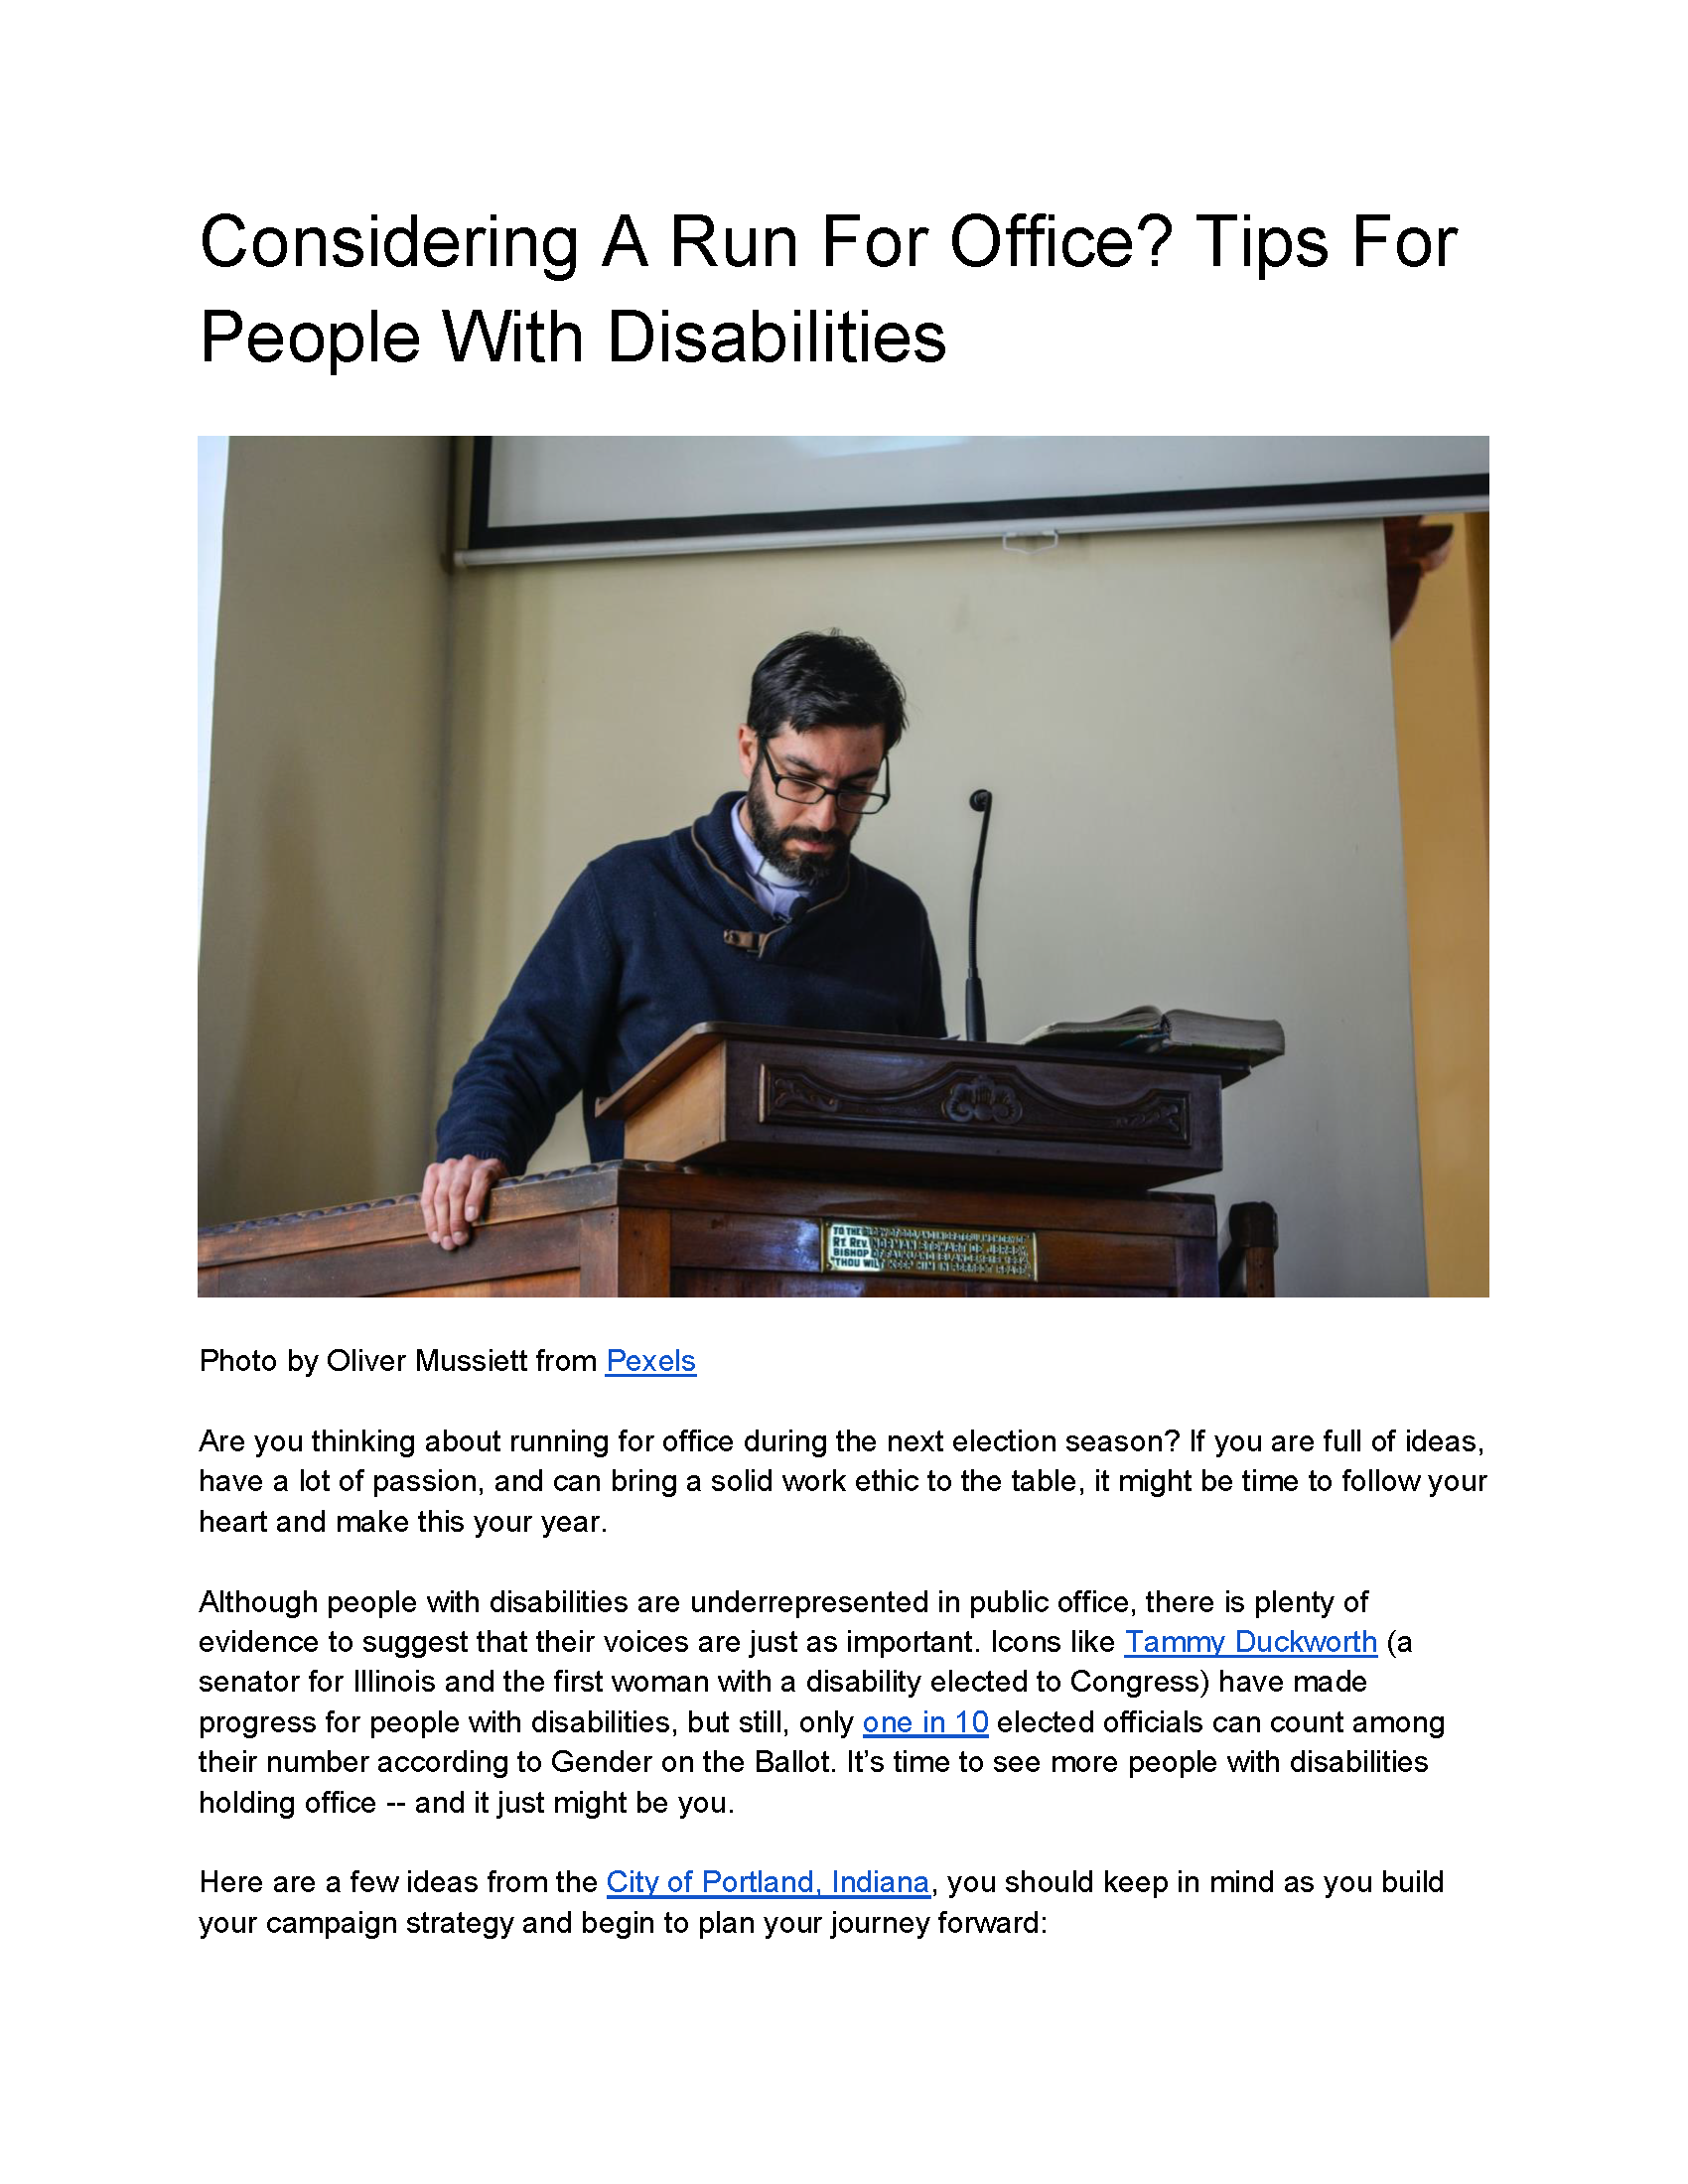 Considering A Run For Office  Tips For People With Disabilities Page 1